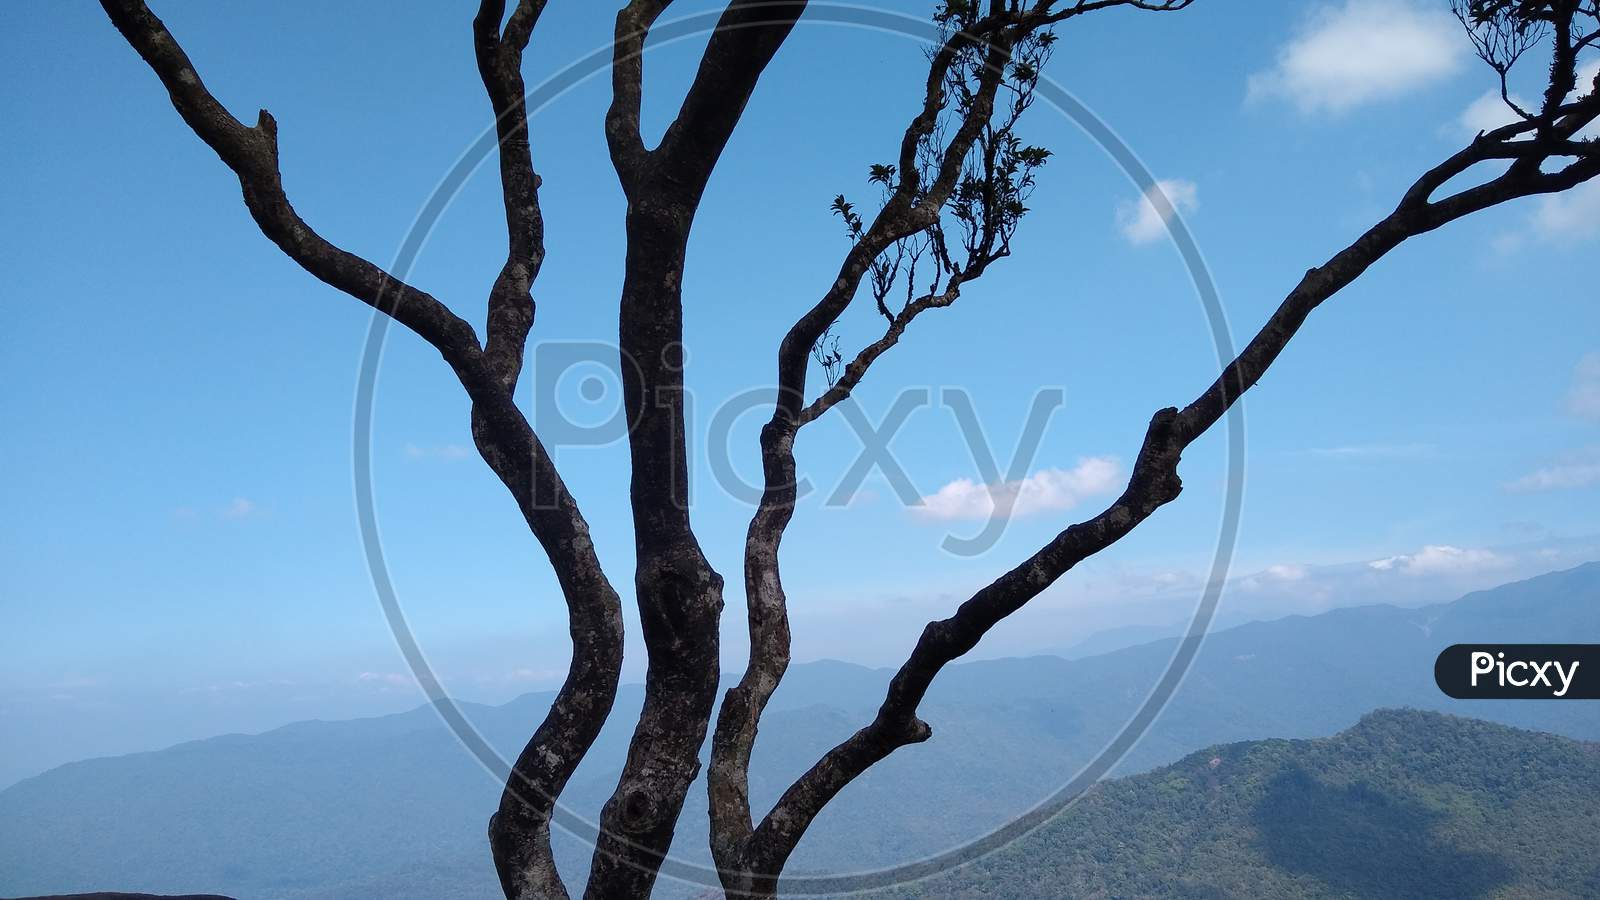 Tree branches and blue sky landscape view